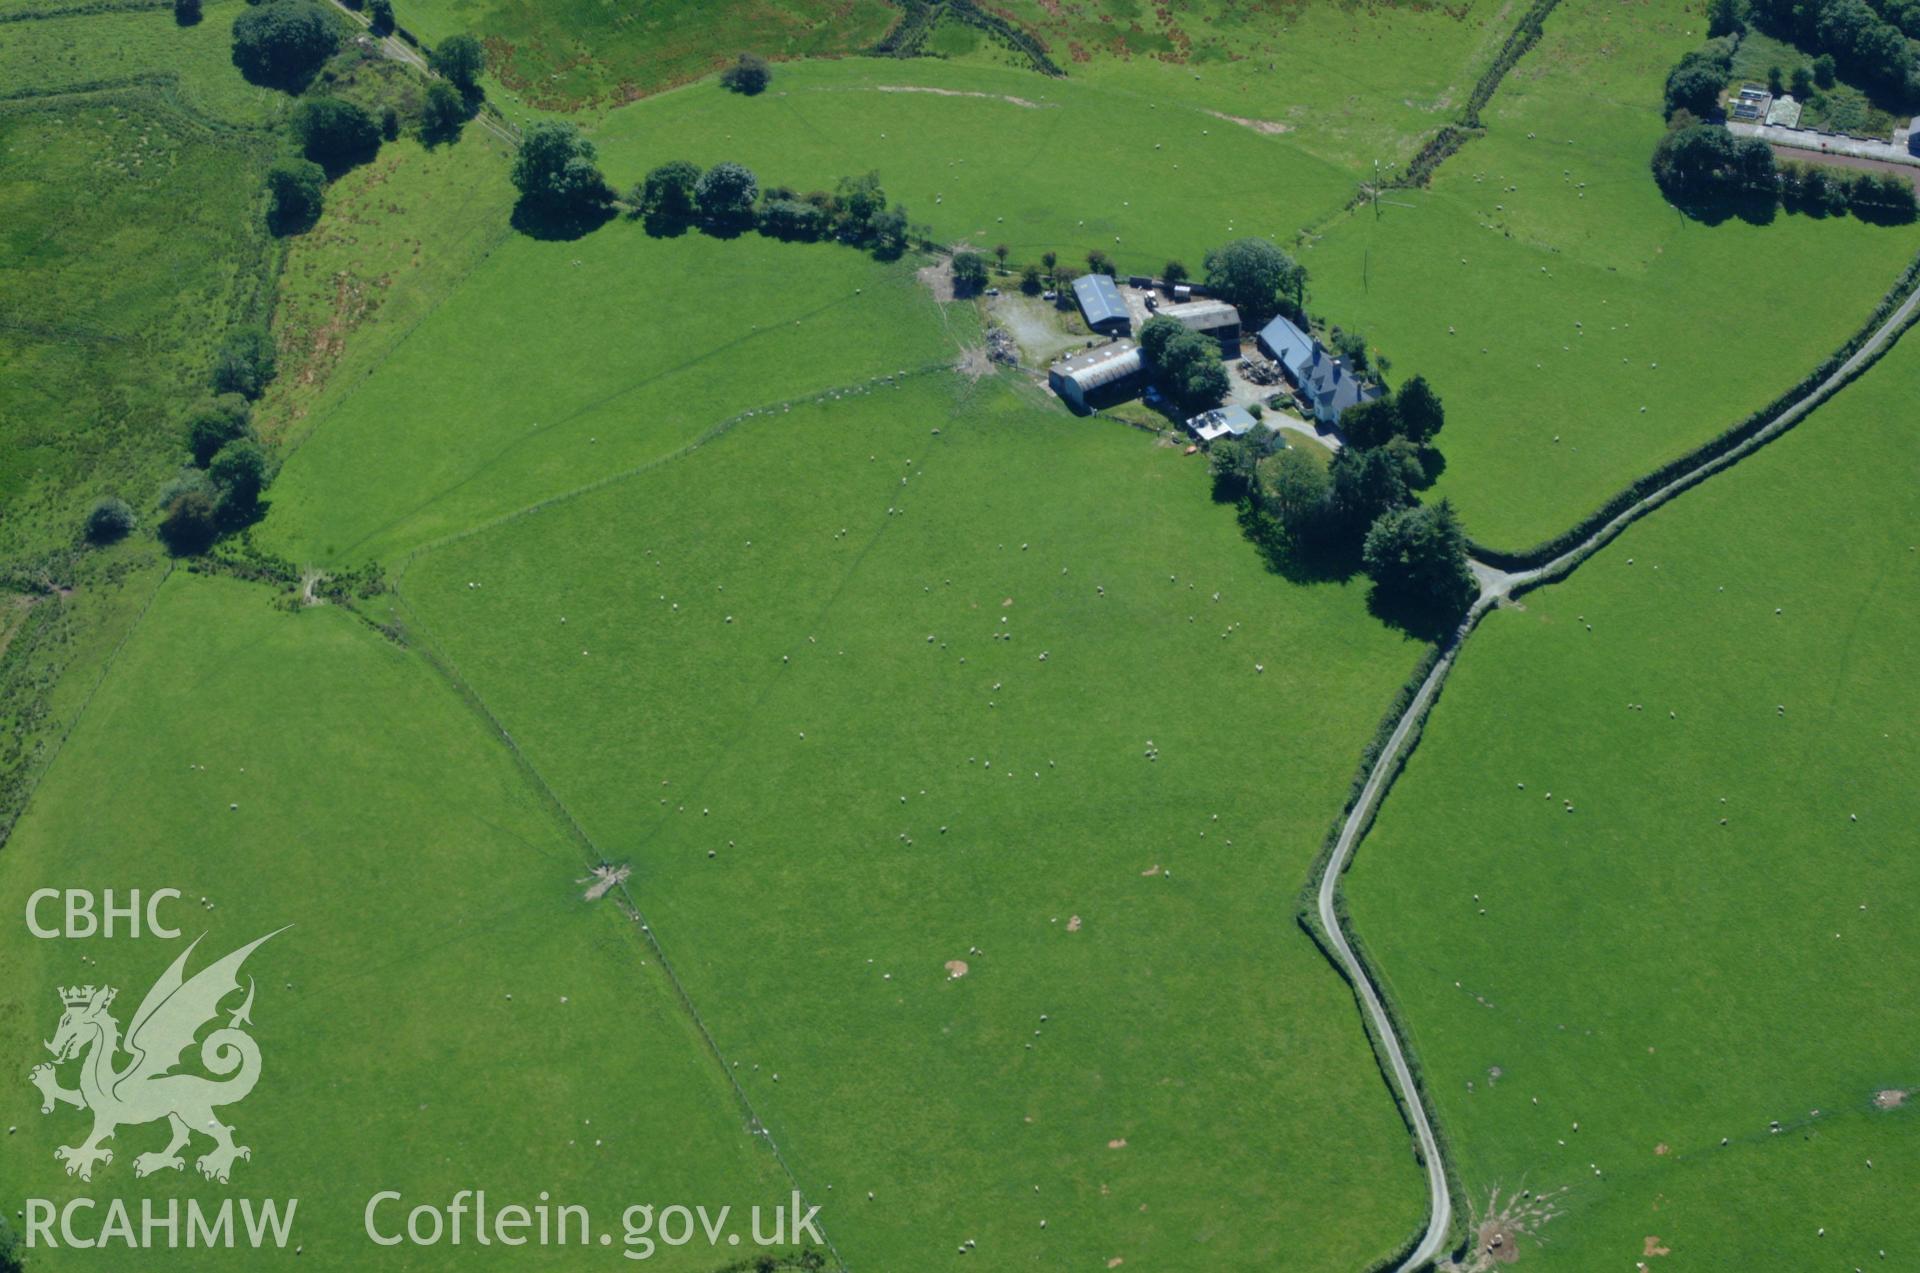 RCAHMW colour oblique aerial photograph of Cefn Gaer Roman military settlement taken on 14/06/2004 by Toby Driver